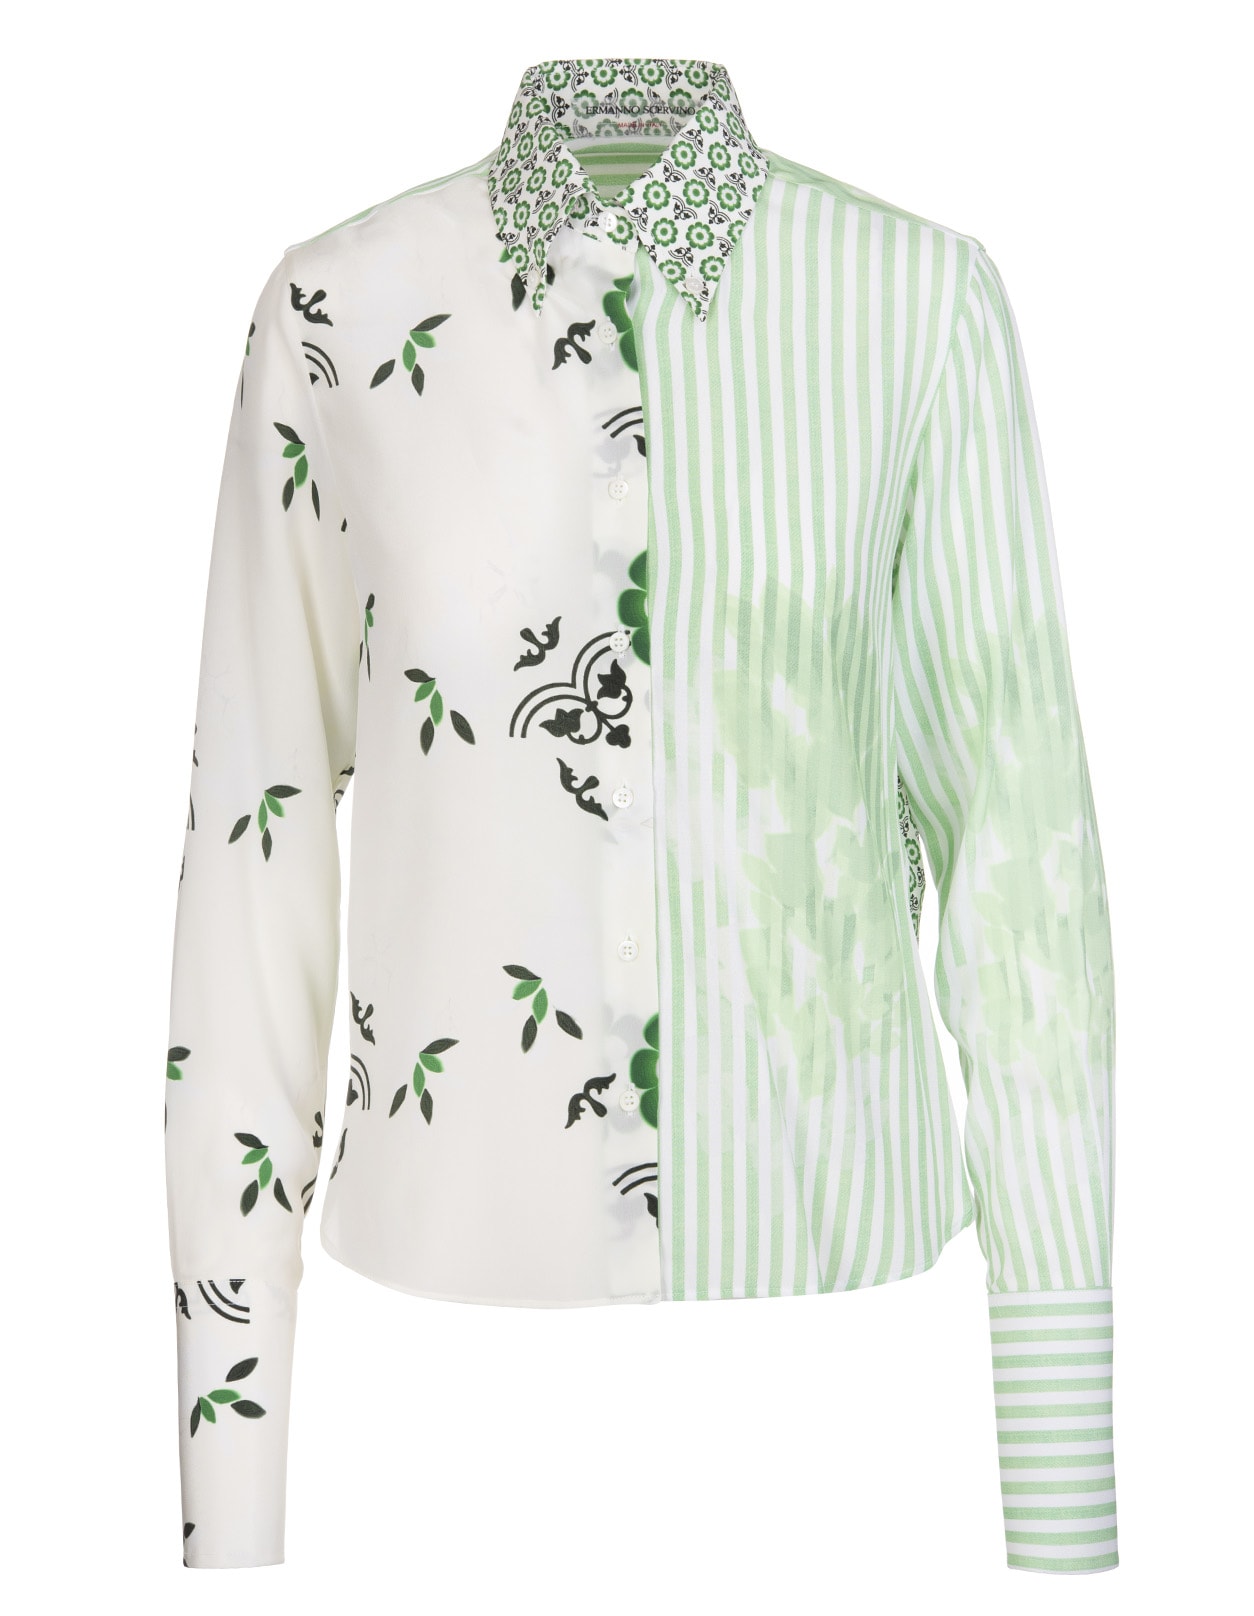 Ermanno Scervino White And Green Shirt With Patchwork Print